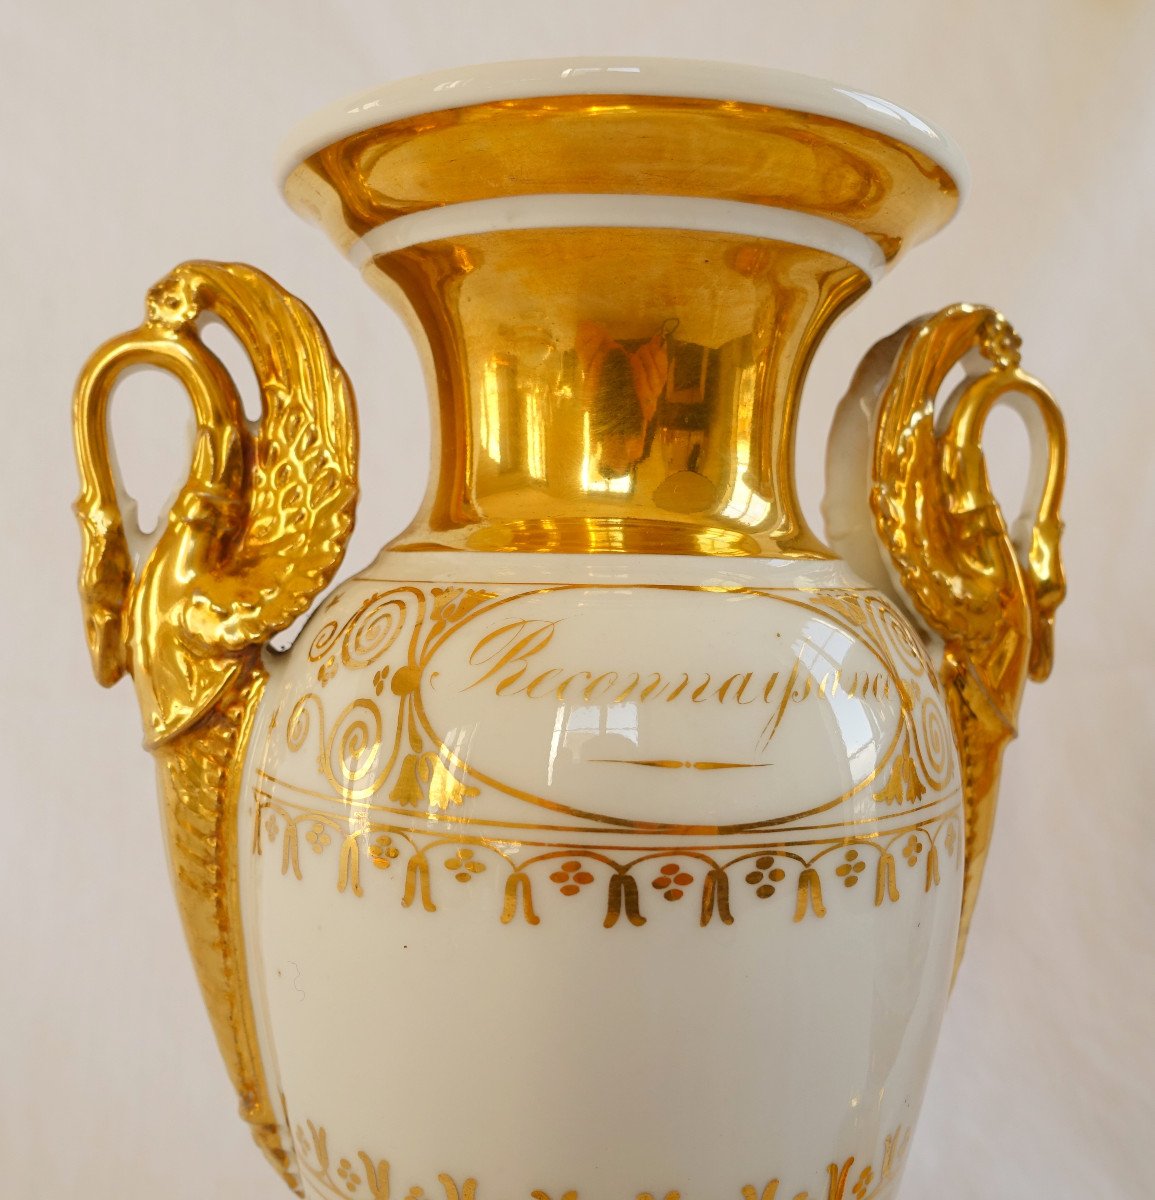 Pair Of Empire Paris Porcelain Vases Enhanced With Fine Gold, Early 19th Century-photo-5